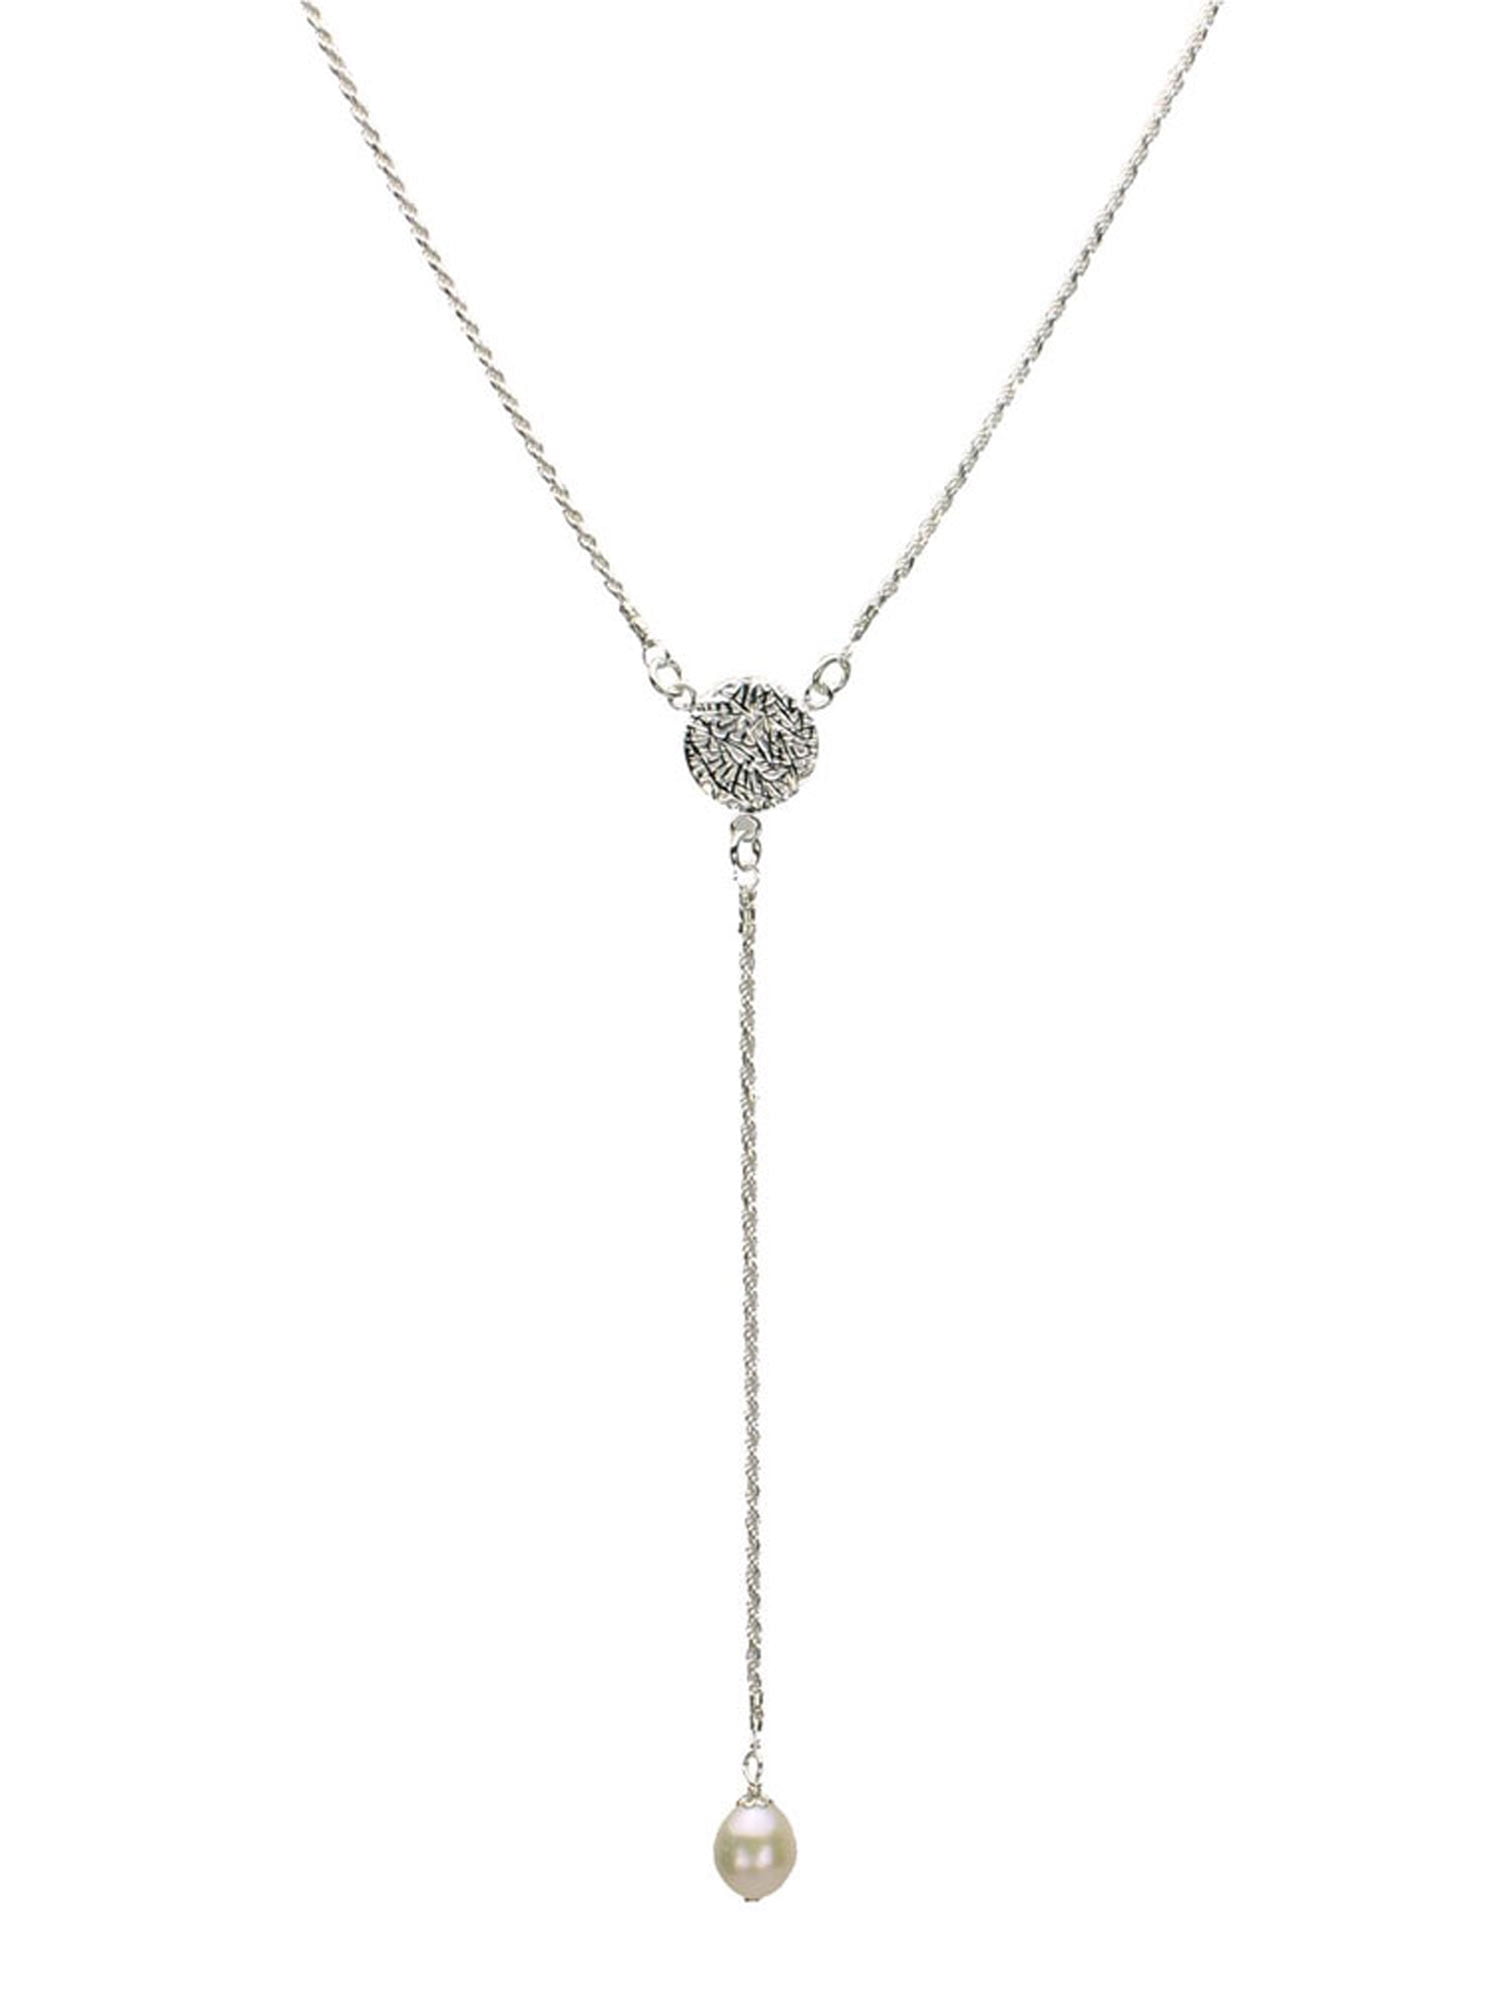 Adjustable Y-Necklace with Freshwater Cultured Pearl and Diamond or Simulated Gemstones for Women 21 inches